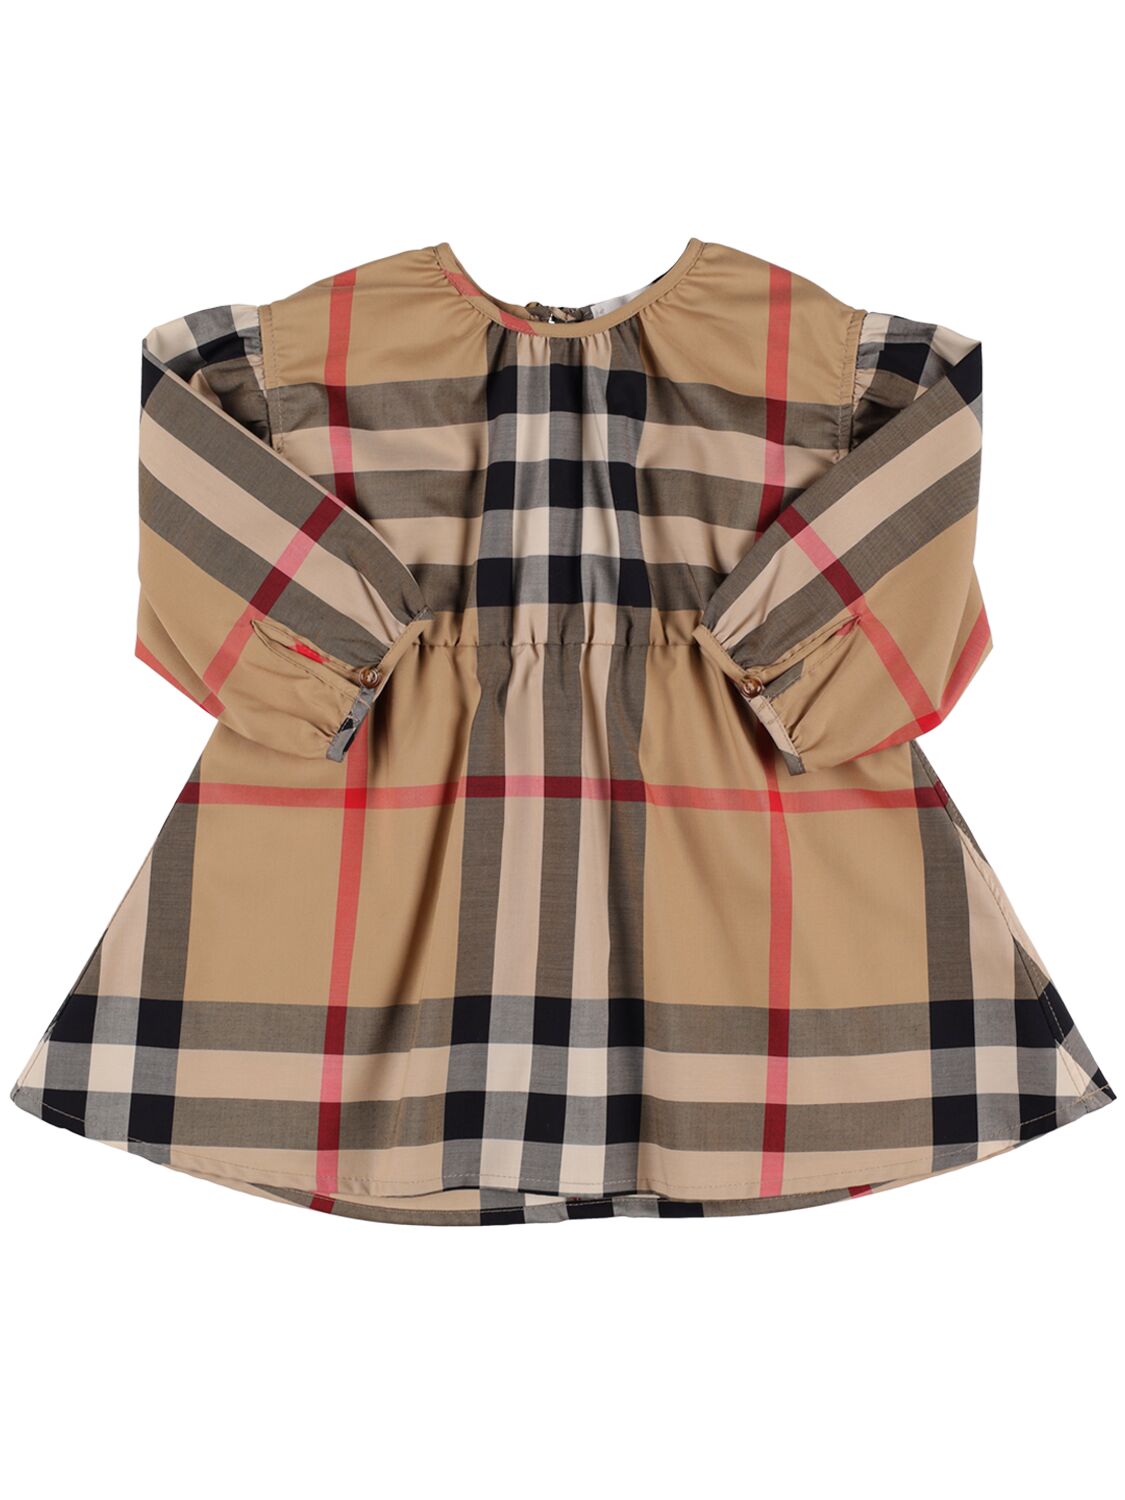 Burberry Kids' Check Print Cotton Dress In Neutral